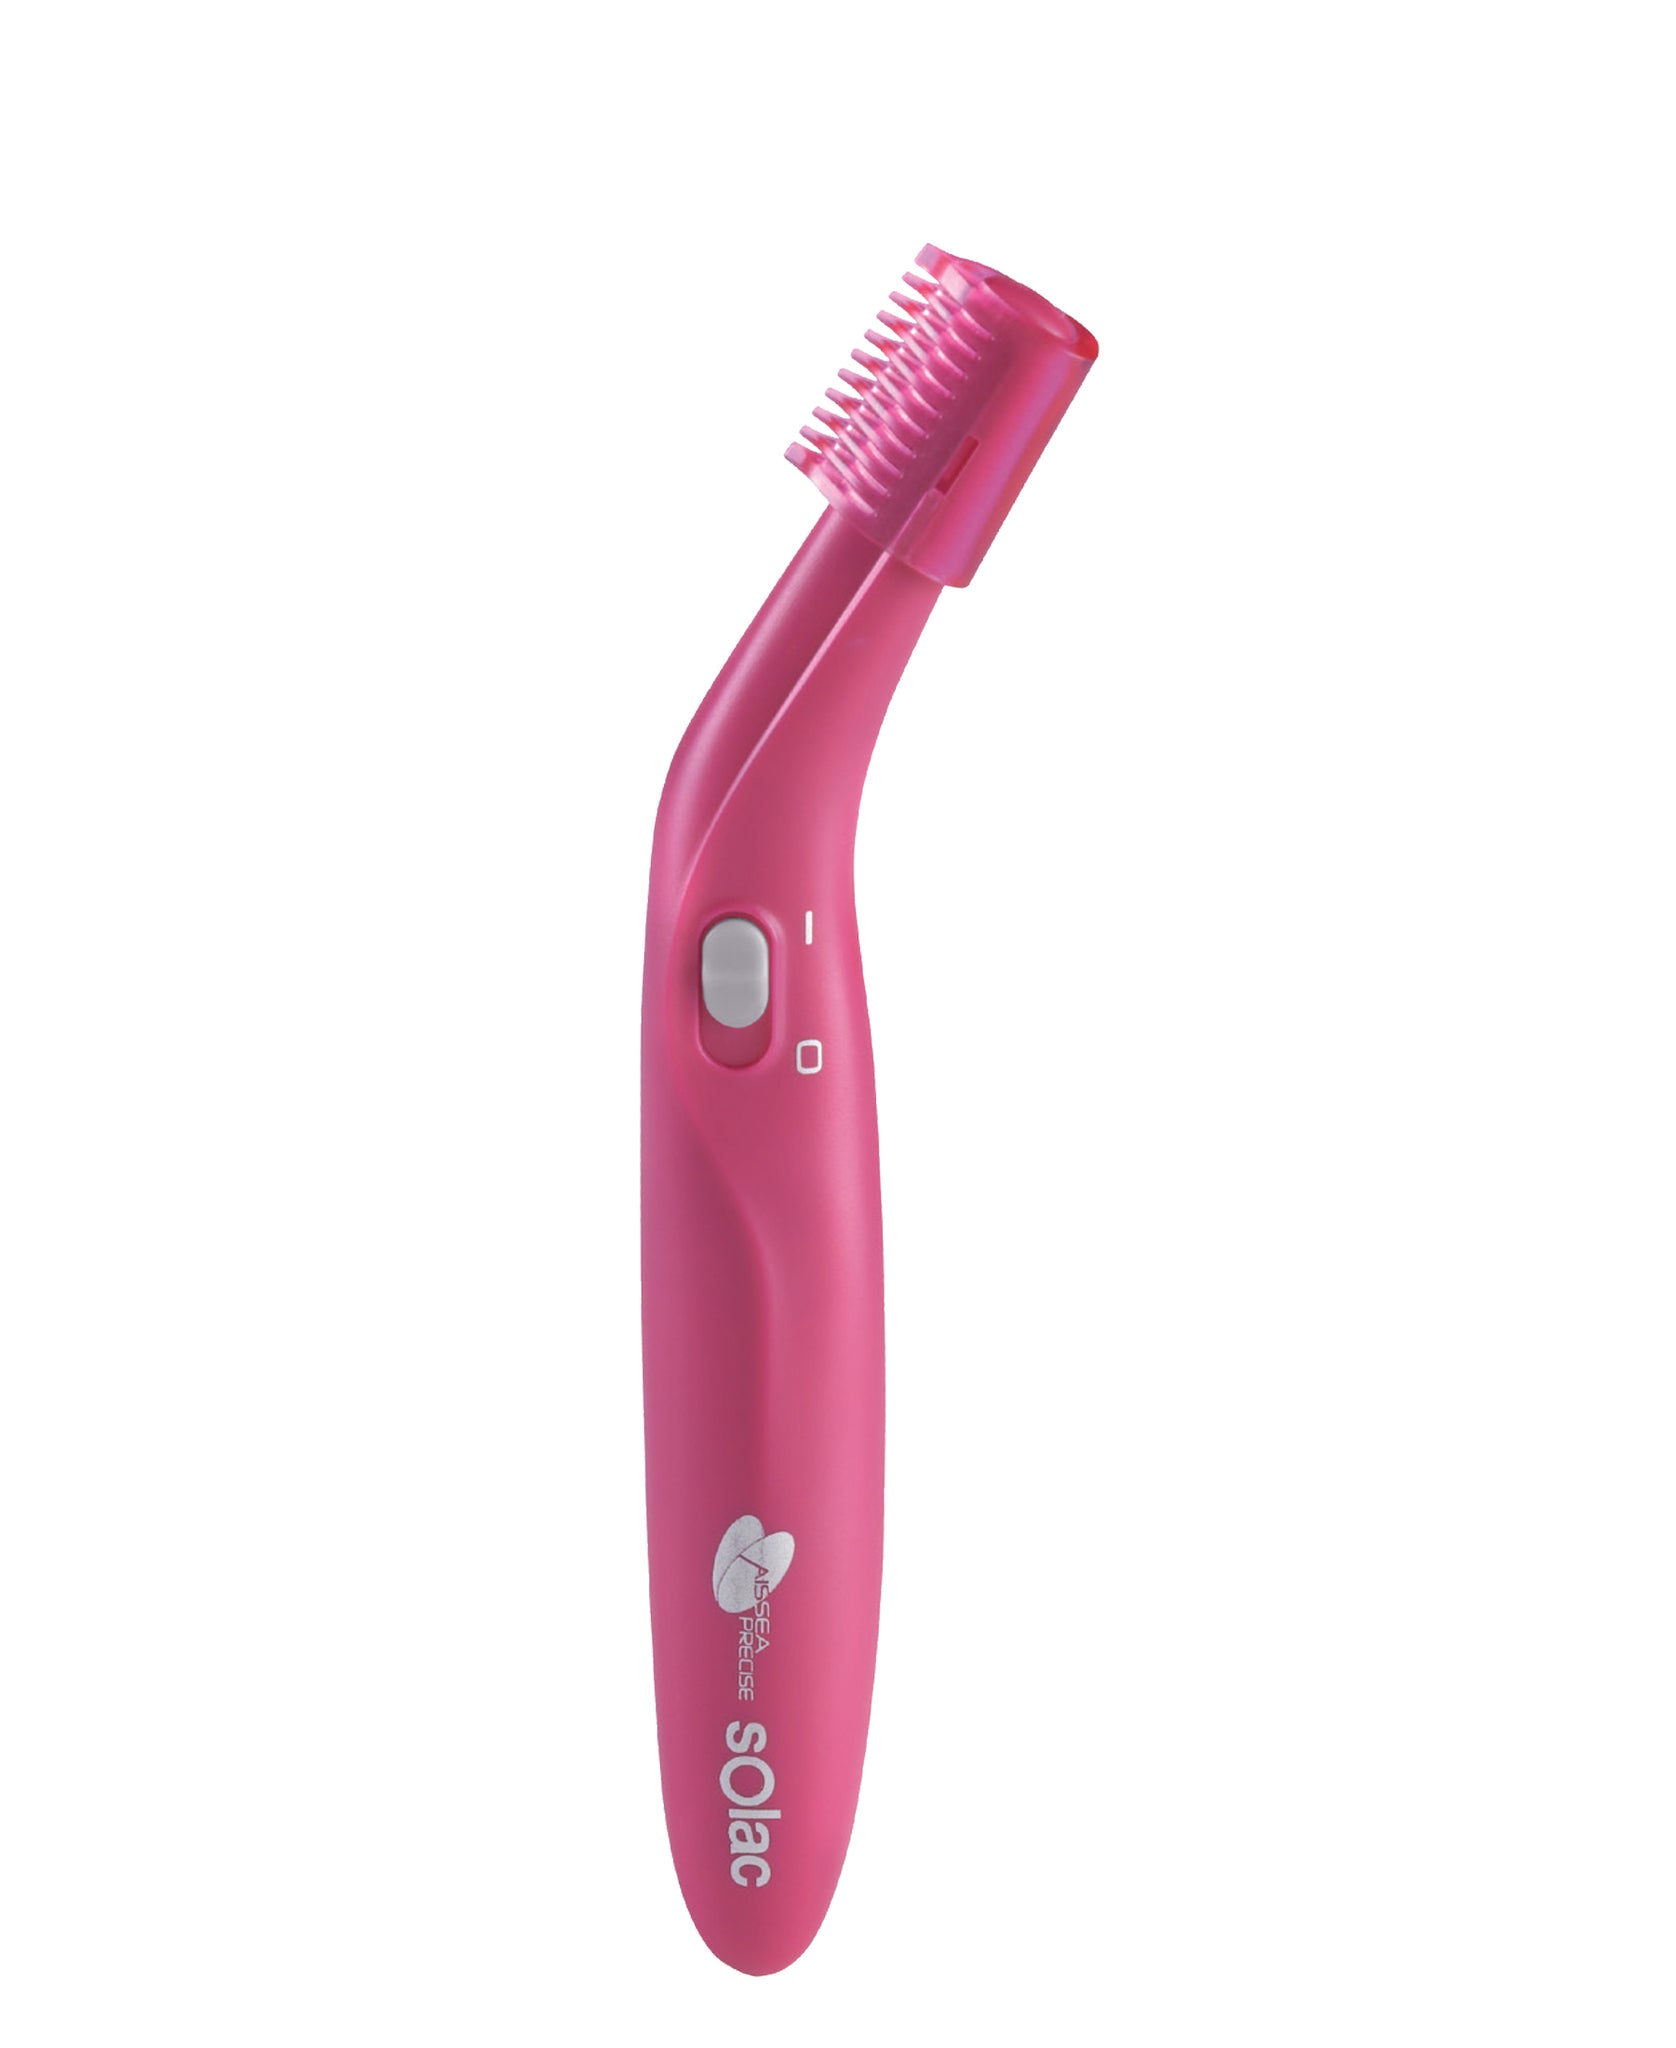 Solac Aissea Precisse Shaver Battery Operated Pink